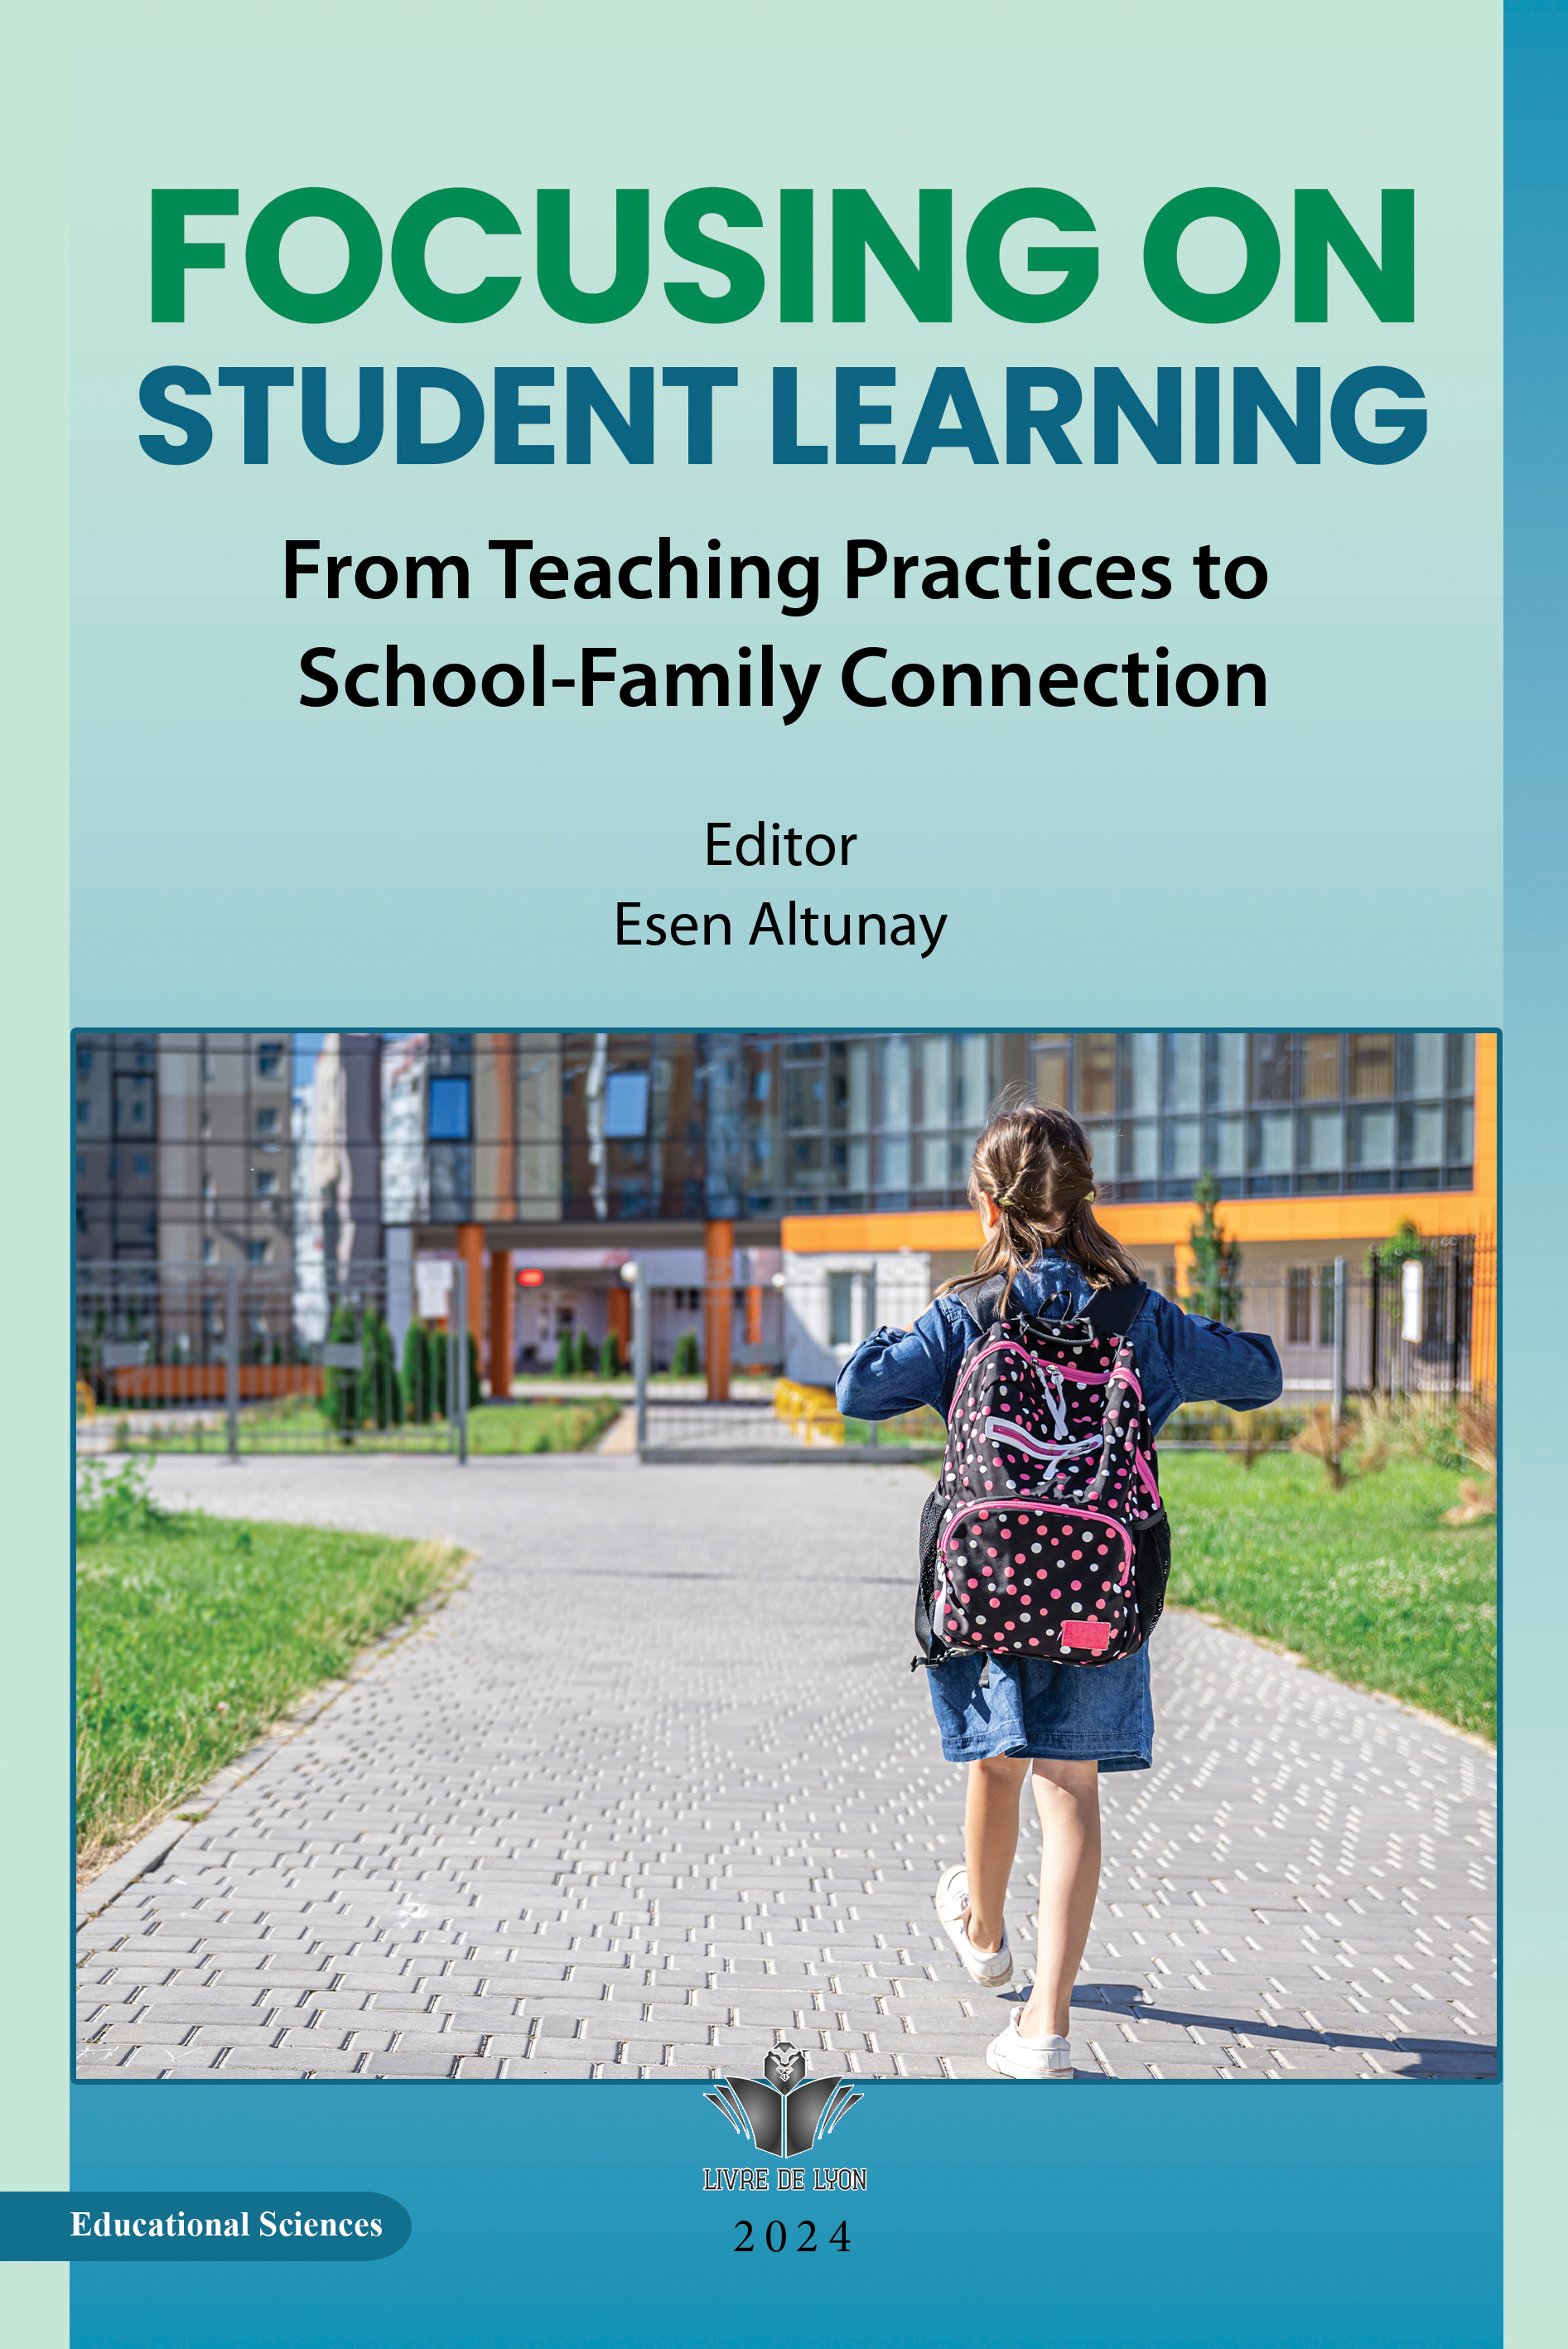 FOCUSING ON STUDENT LEARNING From Teaching Practices to School-Family Connection